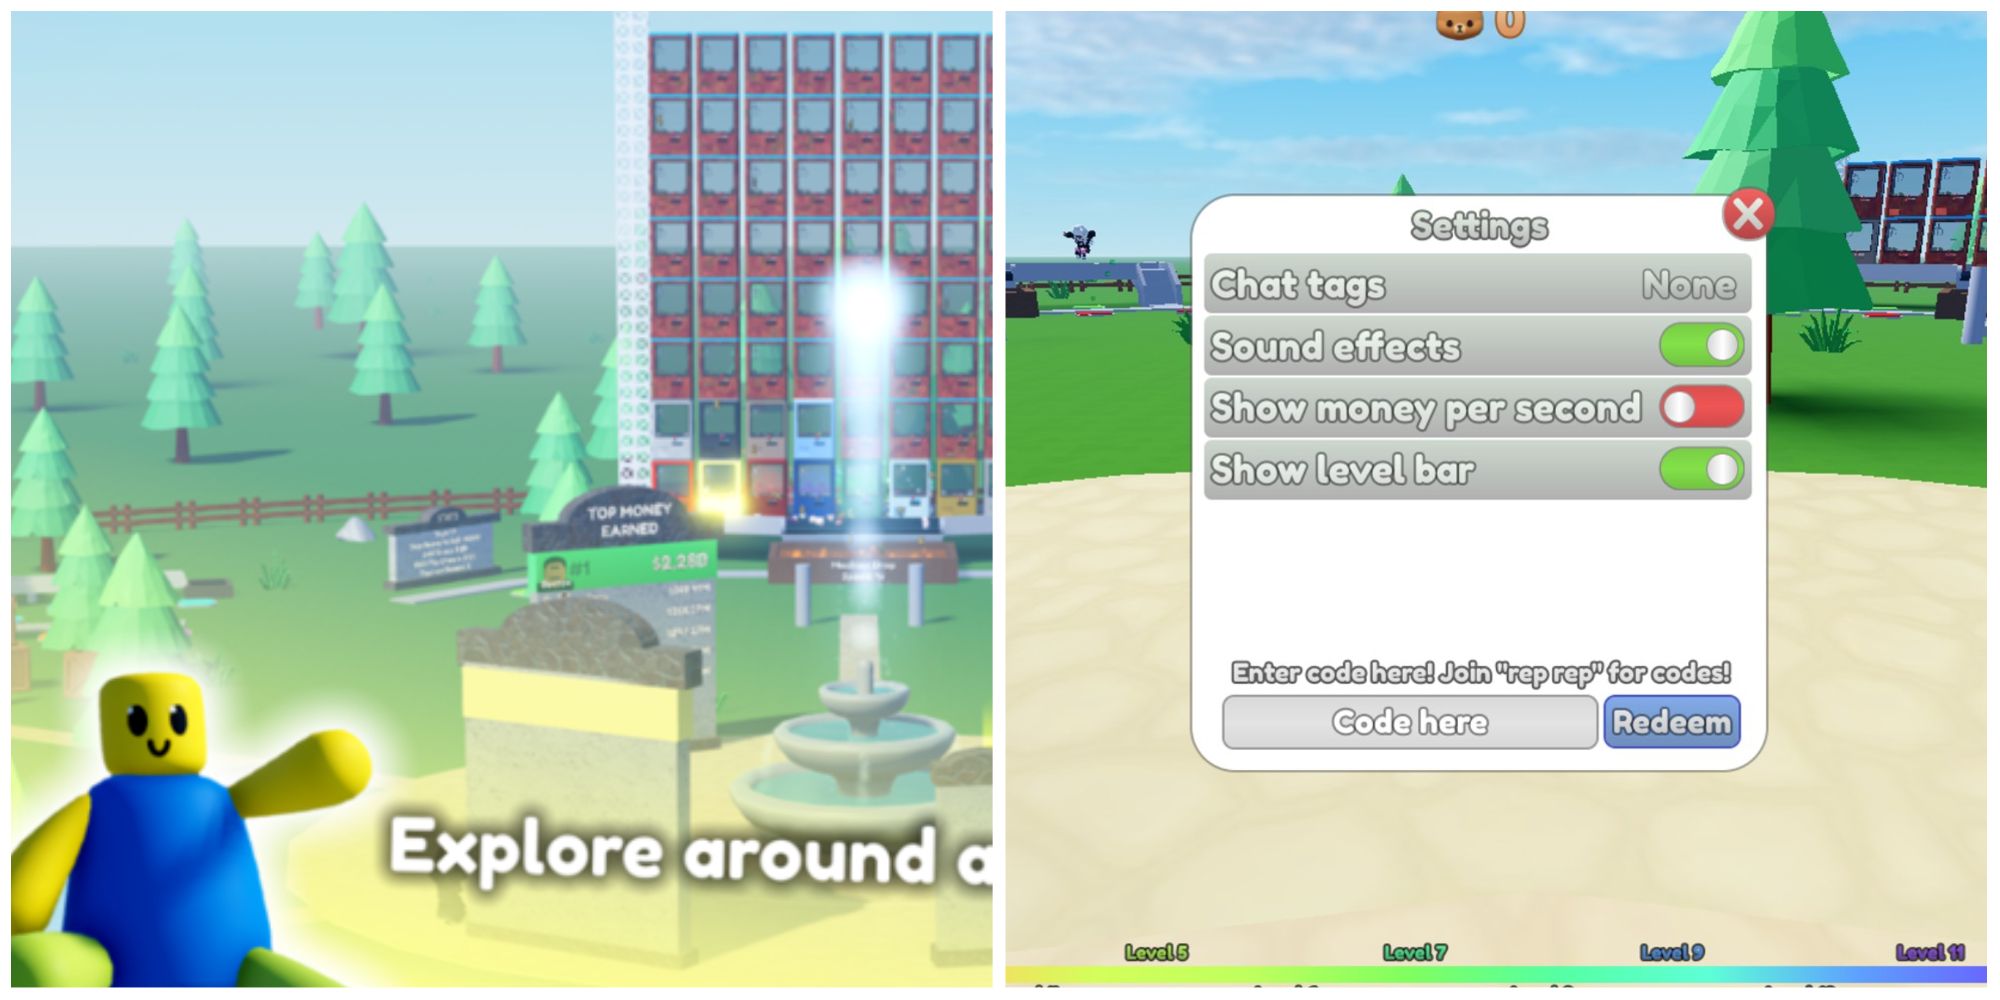 Roblox Power Fighting Tycoon codes for January 2023: Free cash